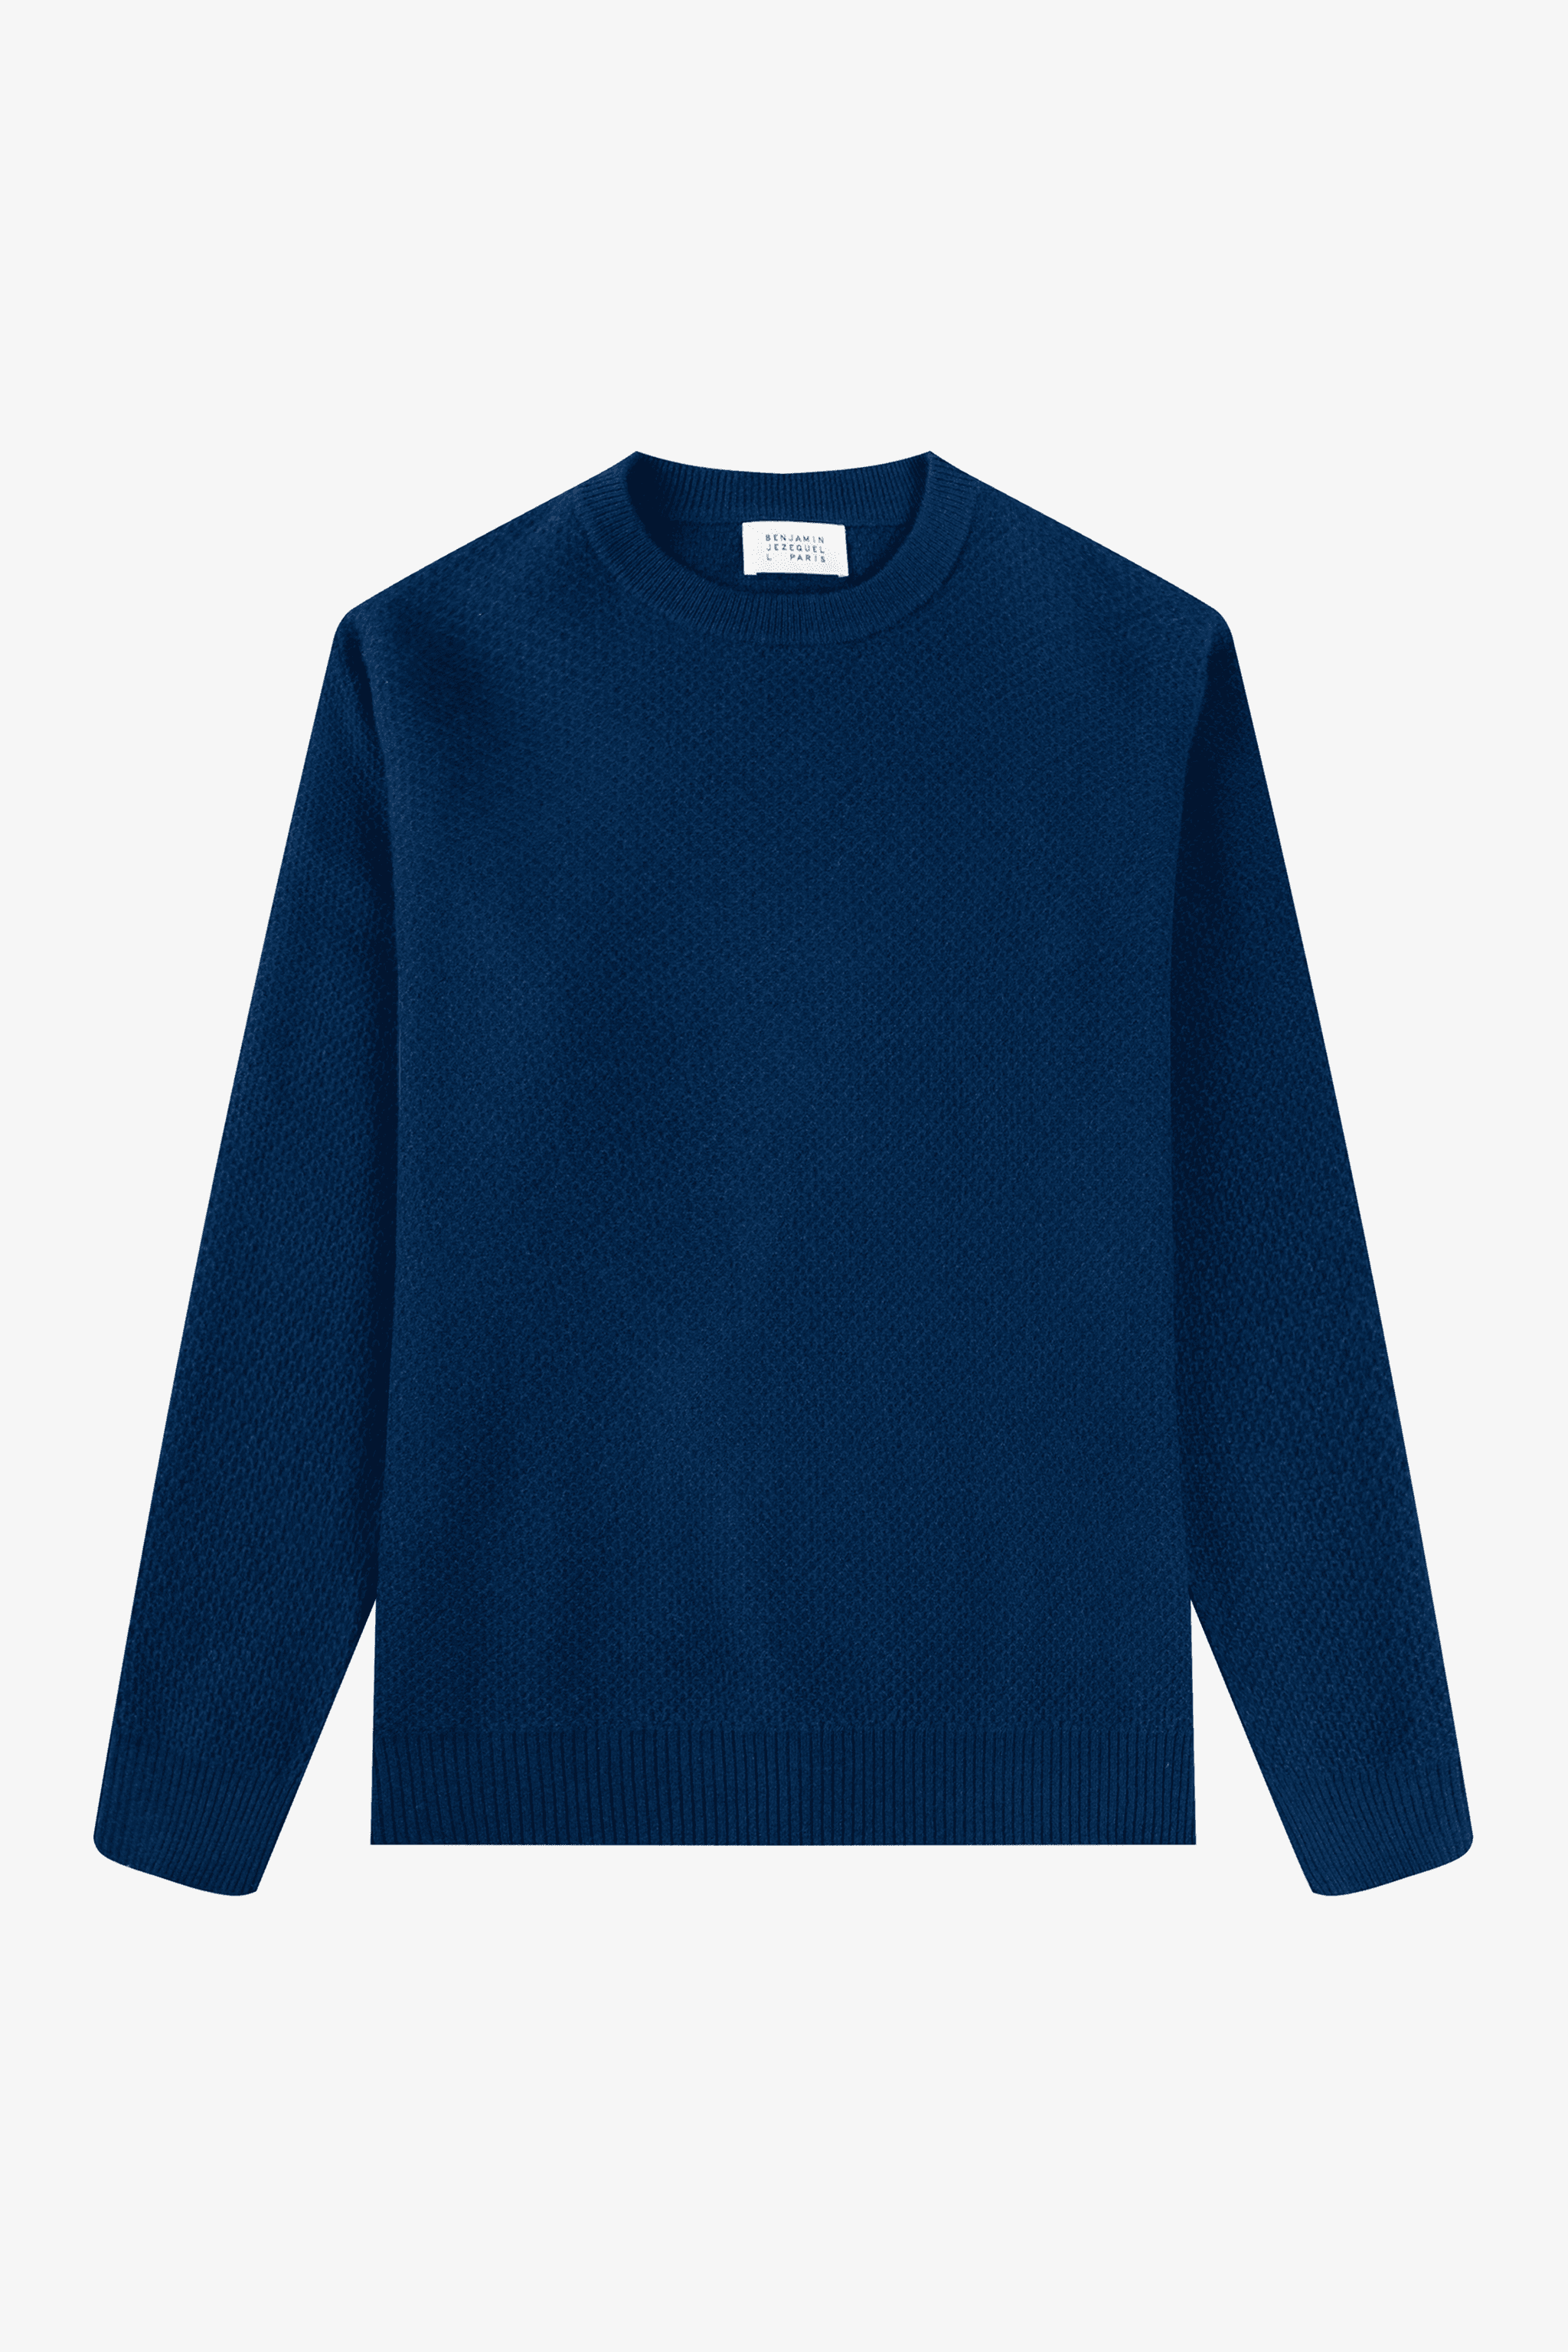 a blue sweater with a round neck and long sleeves